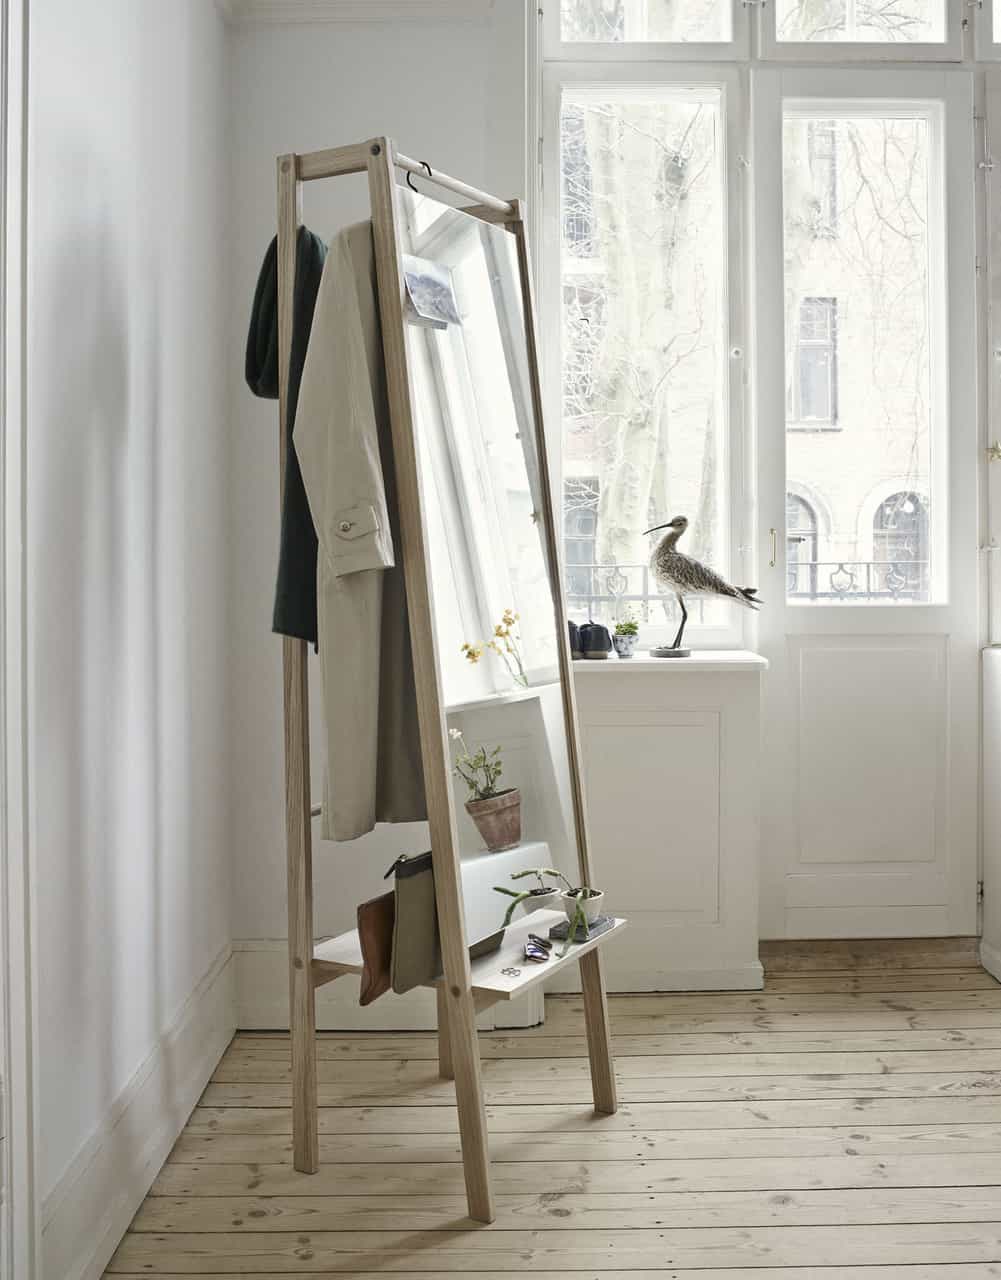 Free-standing mirror with storage